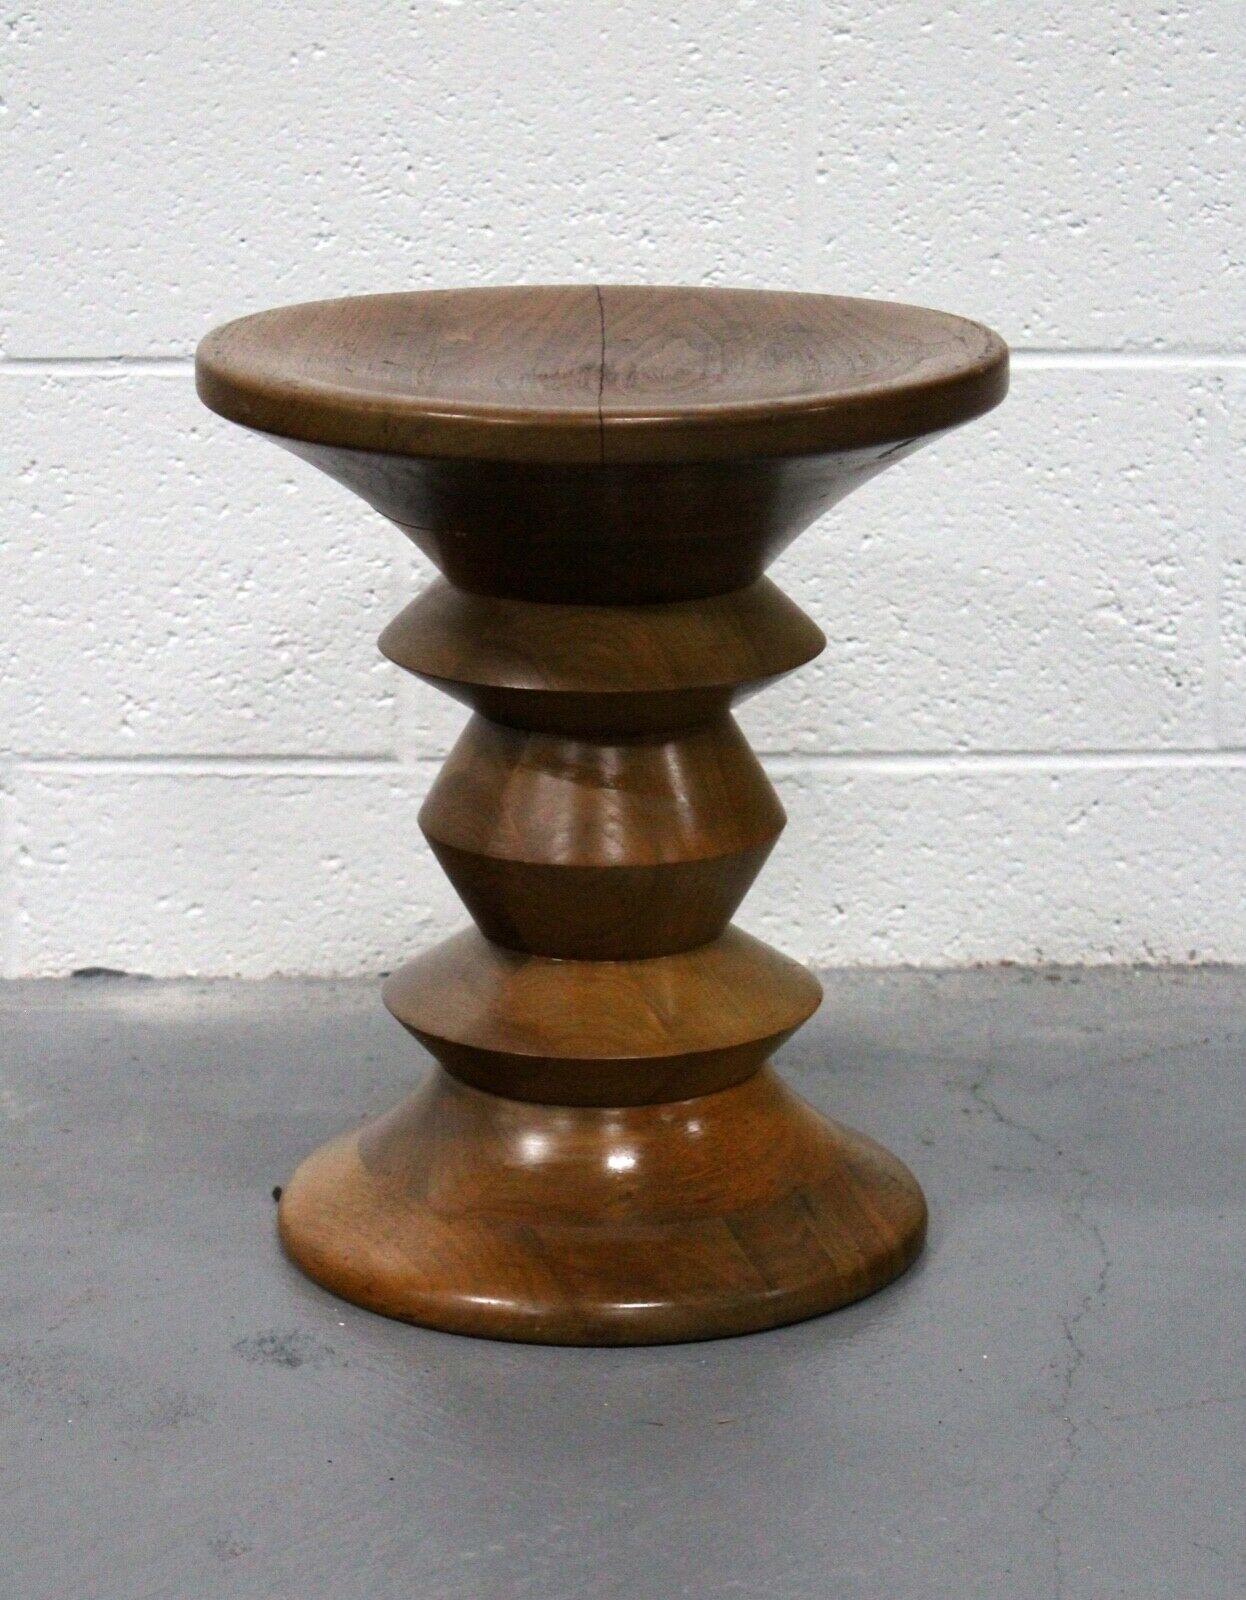 For your consideration is this iconic Charles and Ray Eames for Herman Miller sculptural Walnut stool/side table. Original designed for the lobby of the time-life building in New York City, this piece is equally art and function. Dimensions: 13